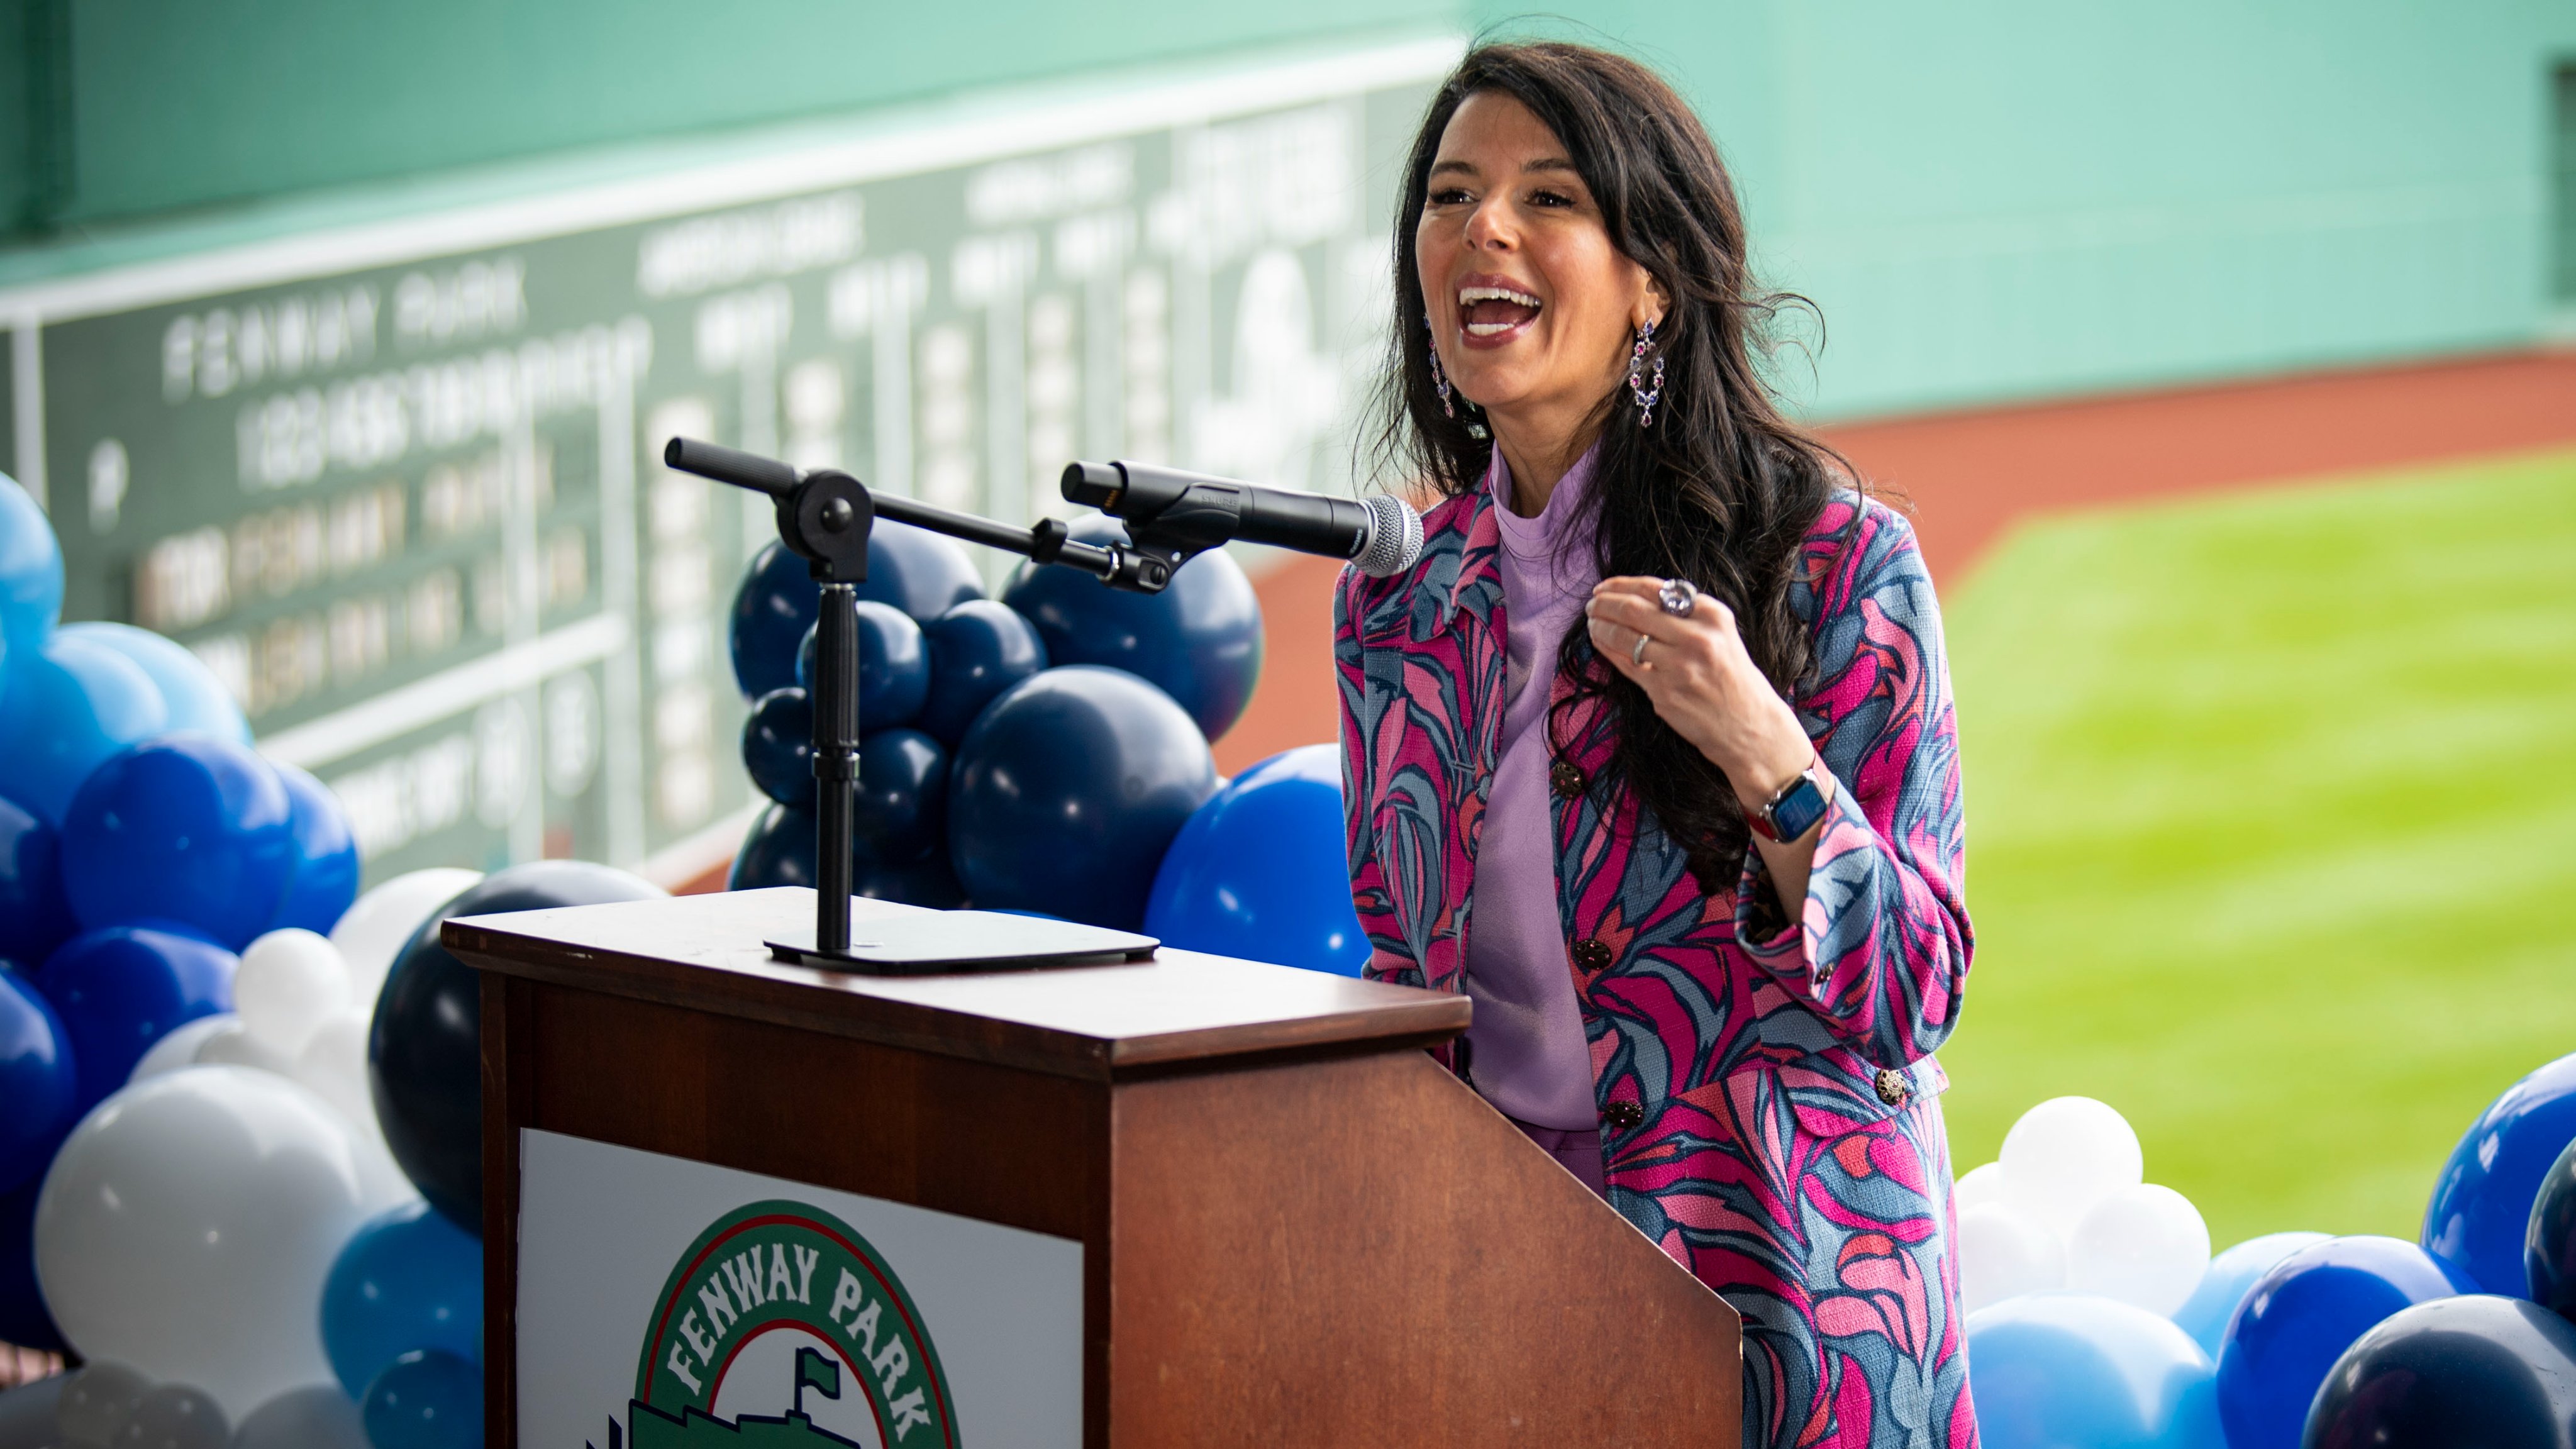 Red Sox, MassMutual Foundations Launch Fenway Park Educational